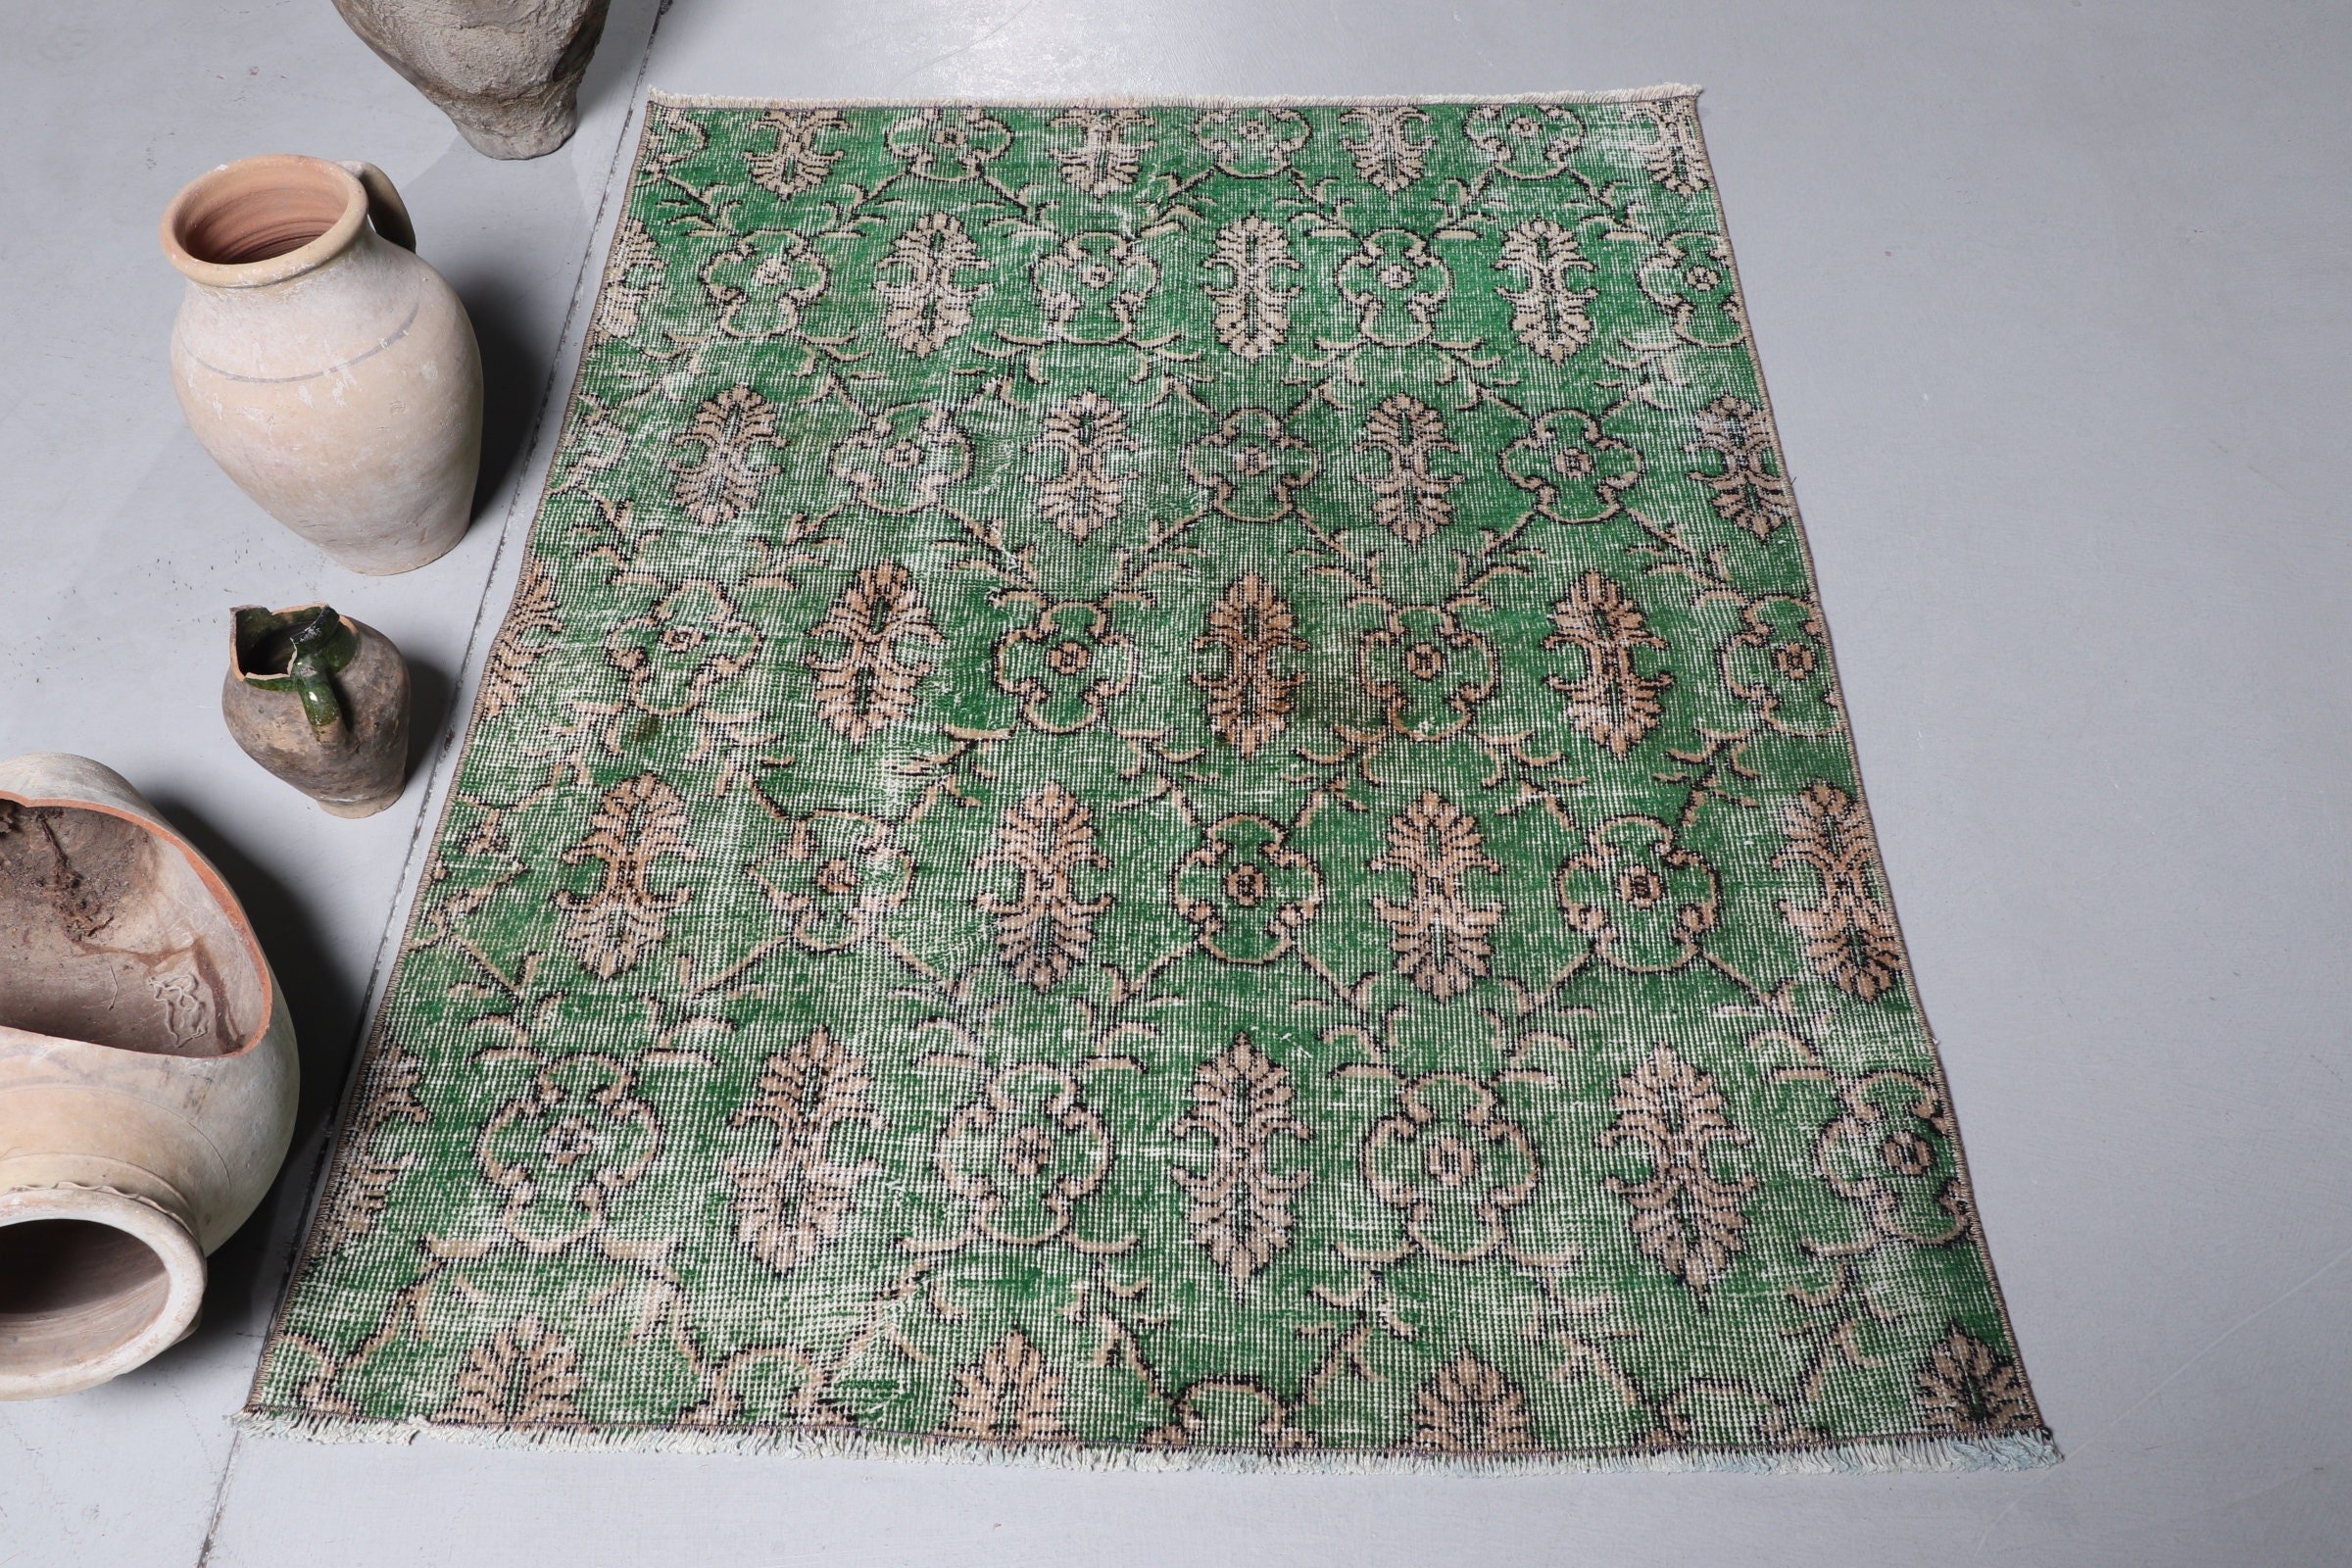 Entry Rug, Kitchen Rugs, 3.6x4.6 ft Accent Rug, Green Bedroom Rug, Turkish Rugs, Vintage Rug, Wool Rug, Home Decor Rug, Rugs for Nursery